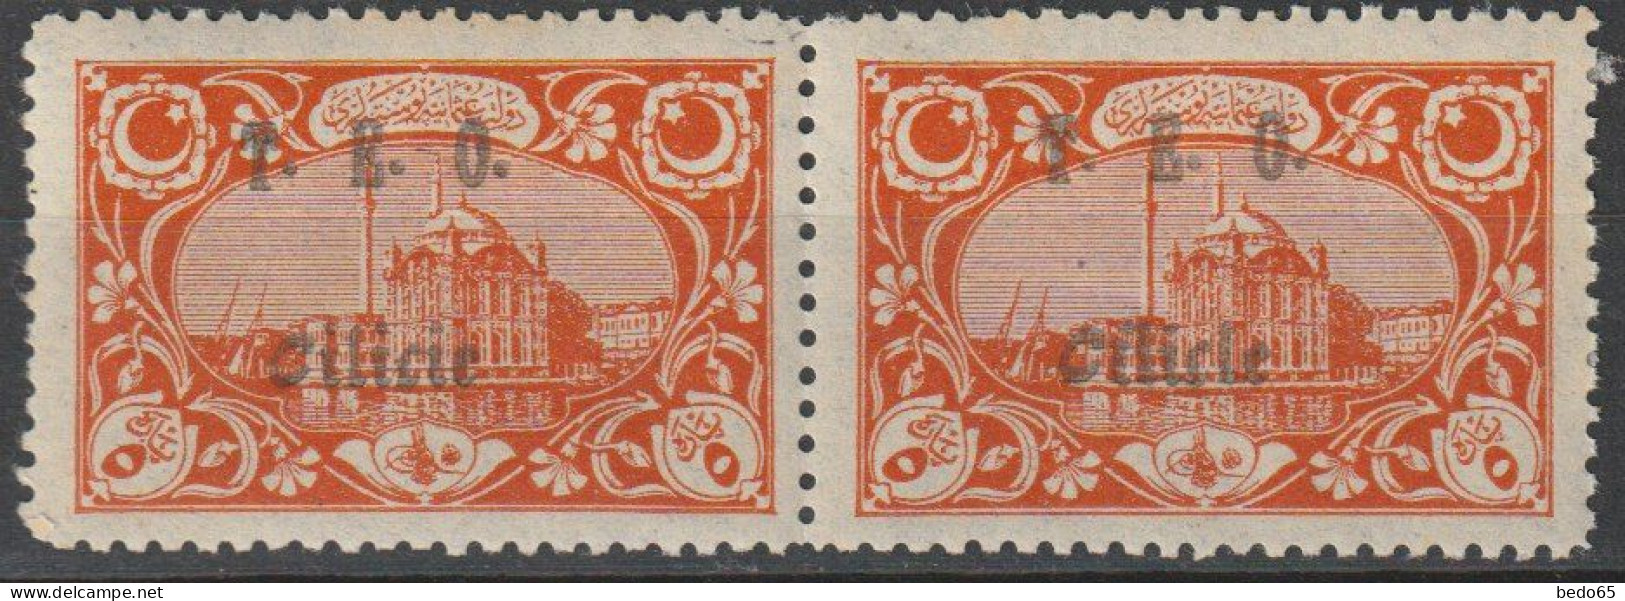 CILICIE N° 60 VARIETEE CILICLE TENANT A NORMAL  NEUF** TTB SANS CHARNIERE - Unused Stamps